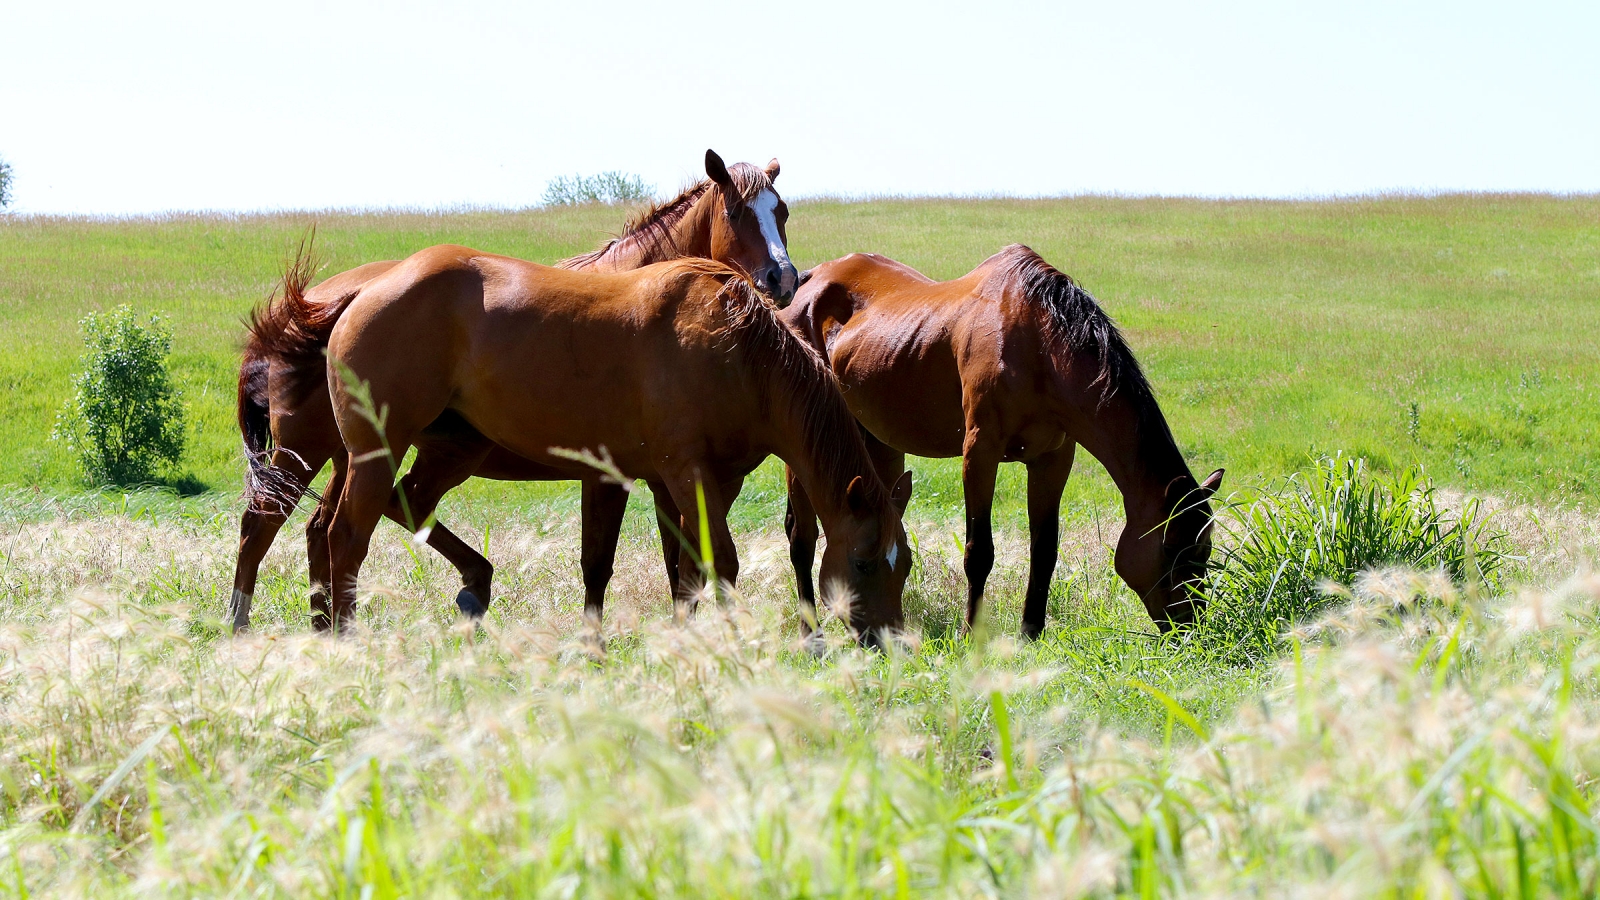 Horses in a pasture grazing